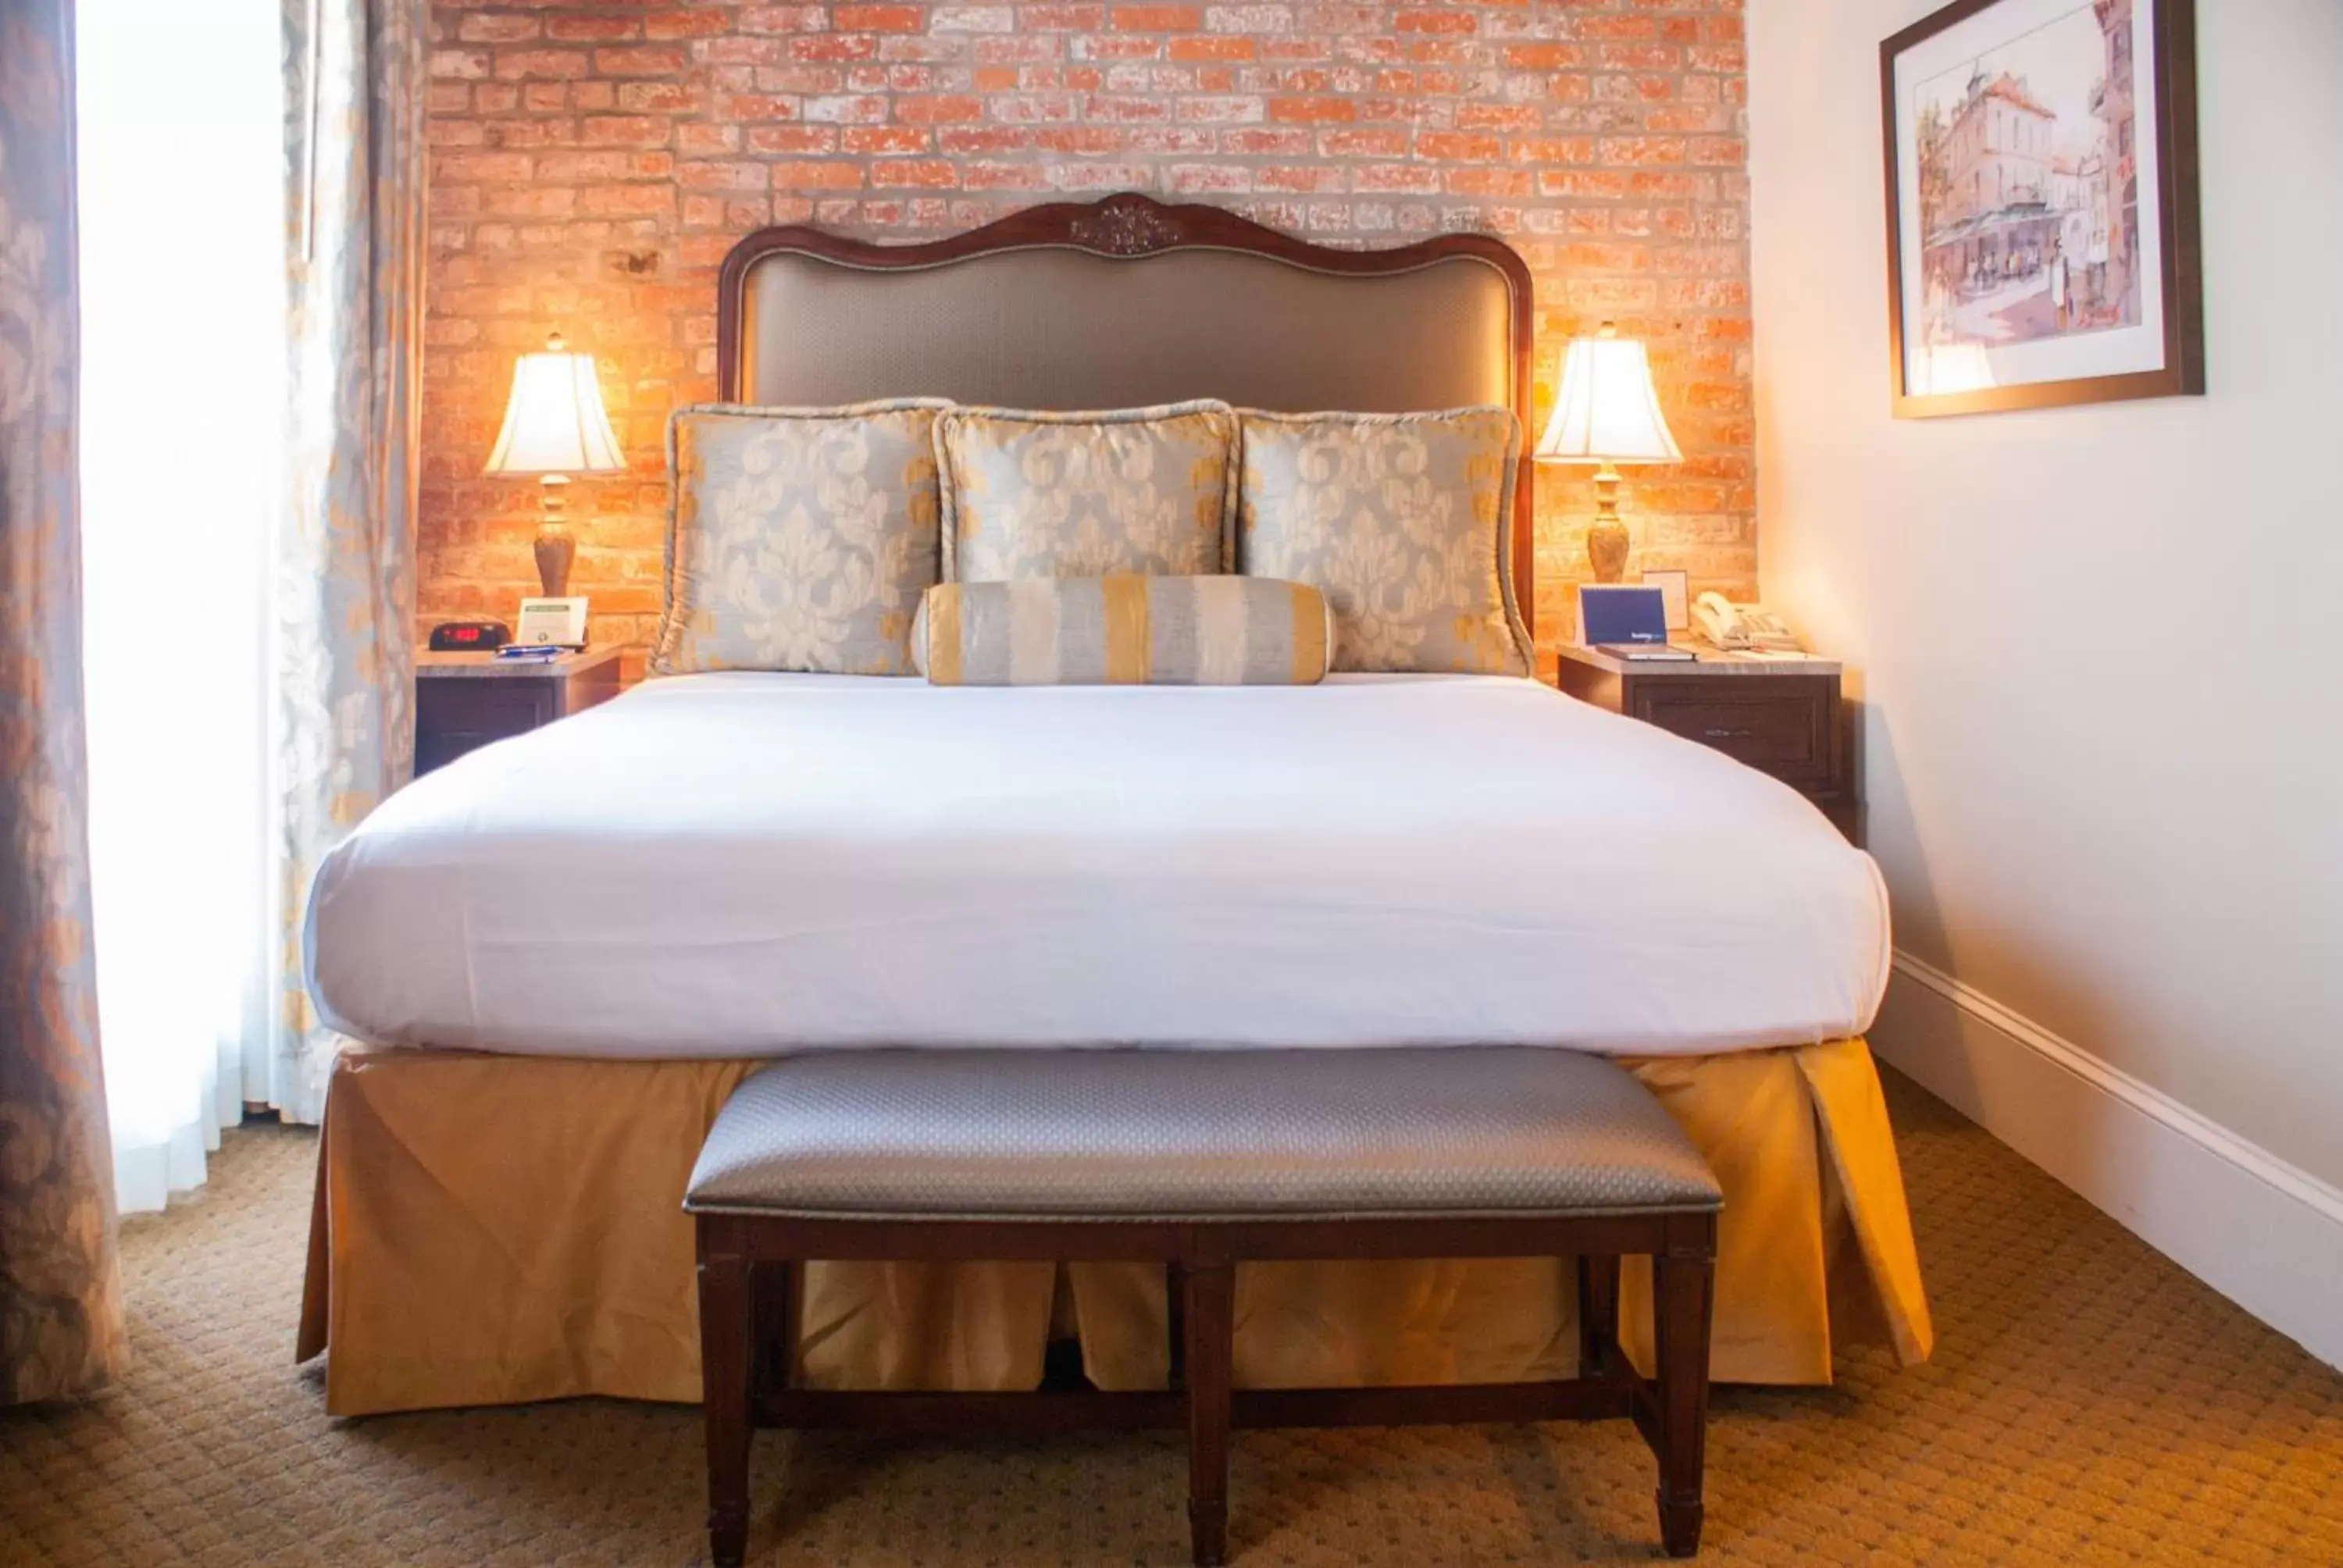 Bed in French Market Inn